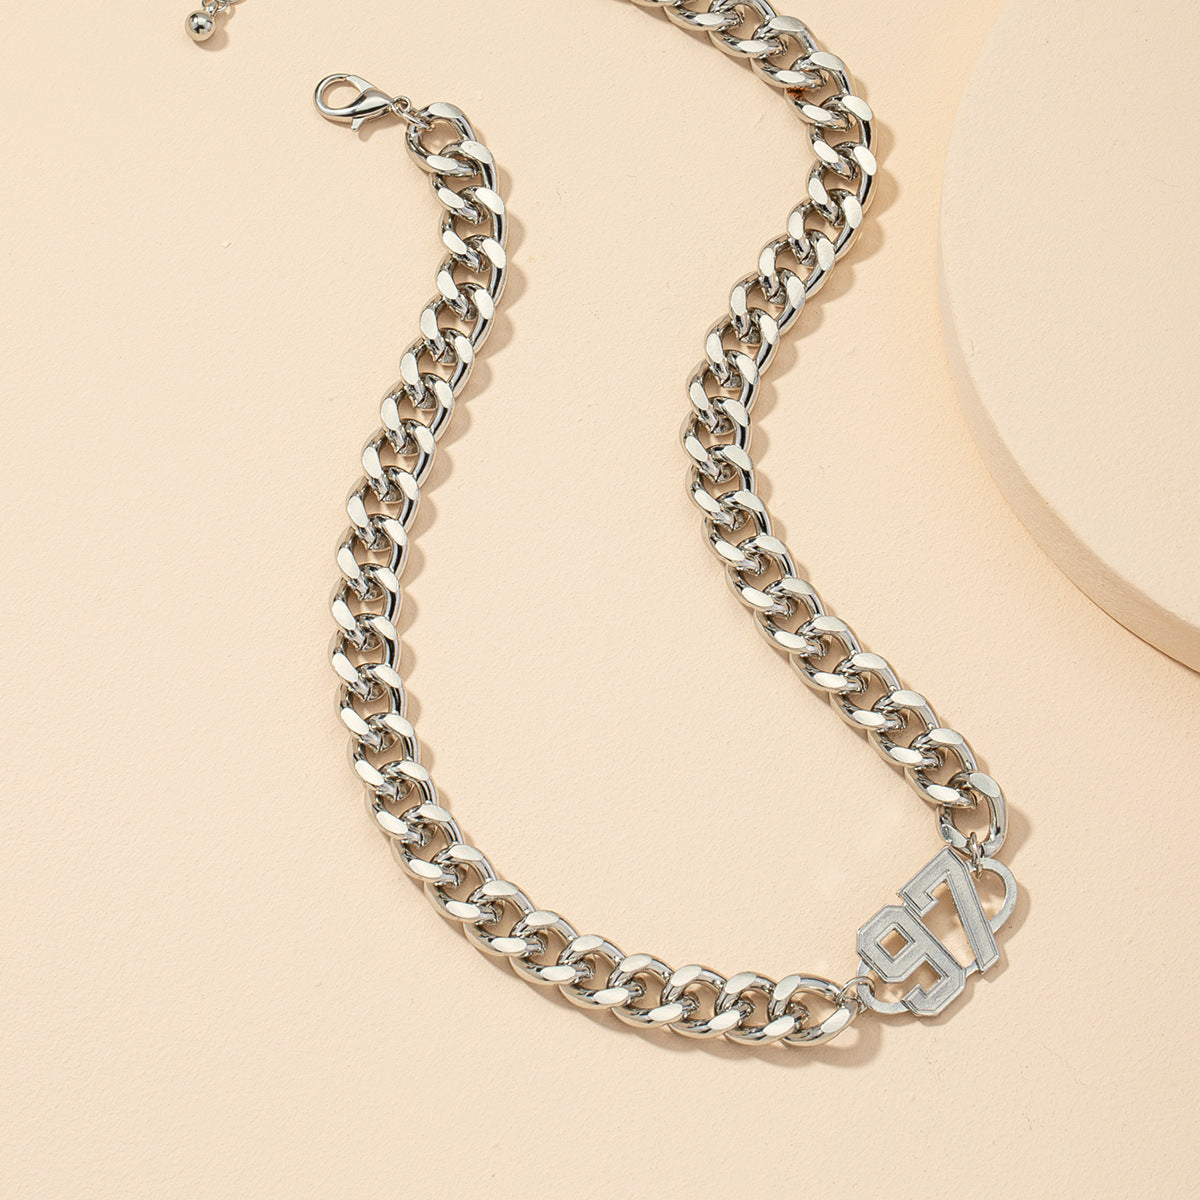 New Trendy Metal Necklace with Thick Chain - Europe & America Fashion Statement Piece